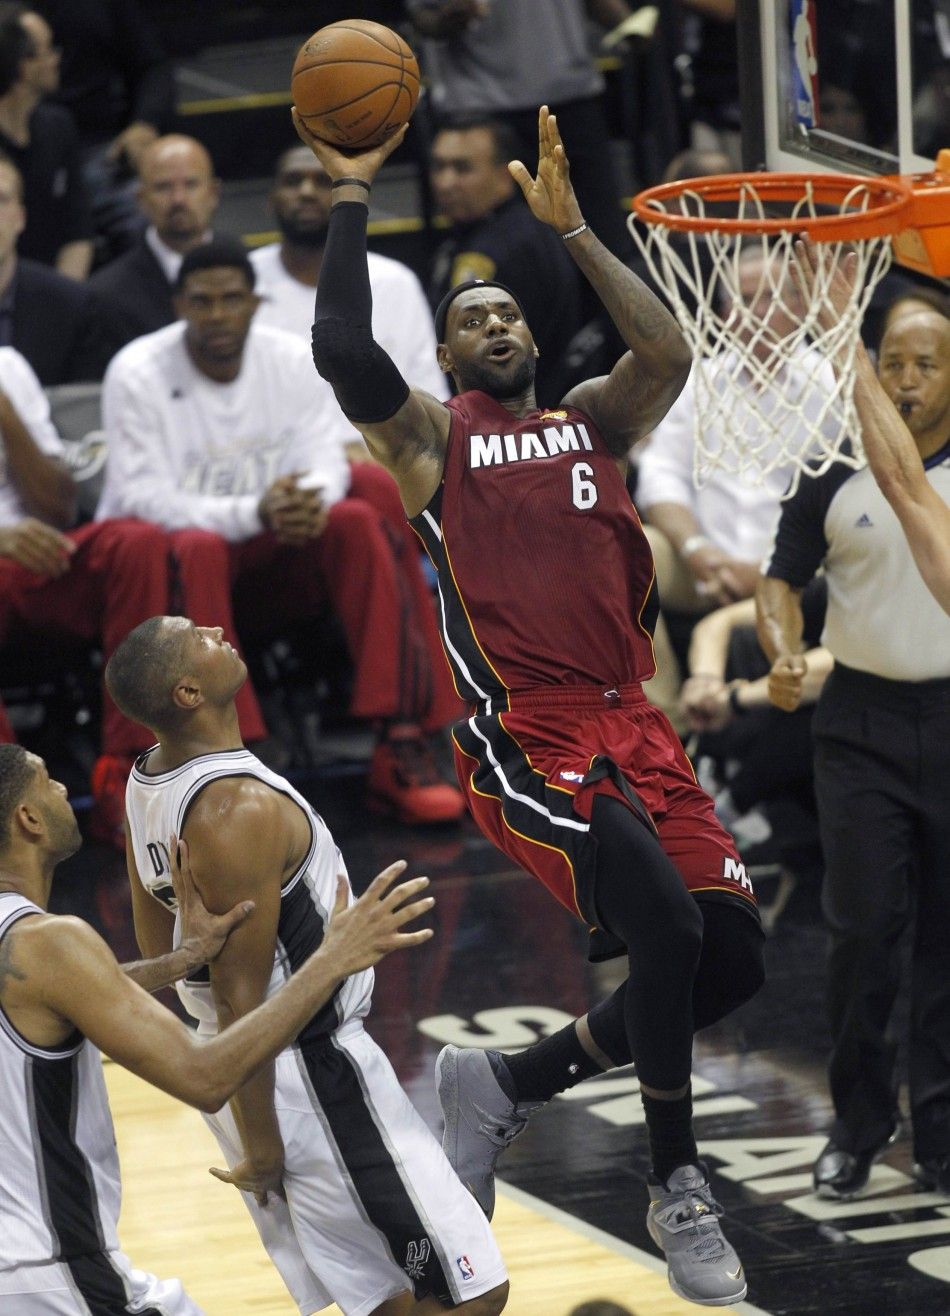 Miami Heats LeBron James R goes up to score past San Antonio Spurs Boris Diaw C of France and Tim Duncan during the second quarter in Game 1 of their NBA Finals basketball series in San Antonio, Texas June 5, 2014. 